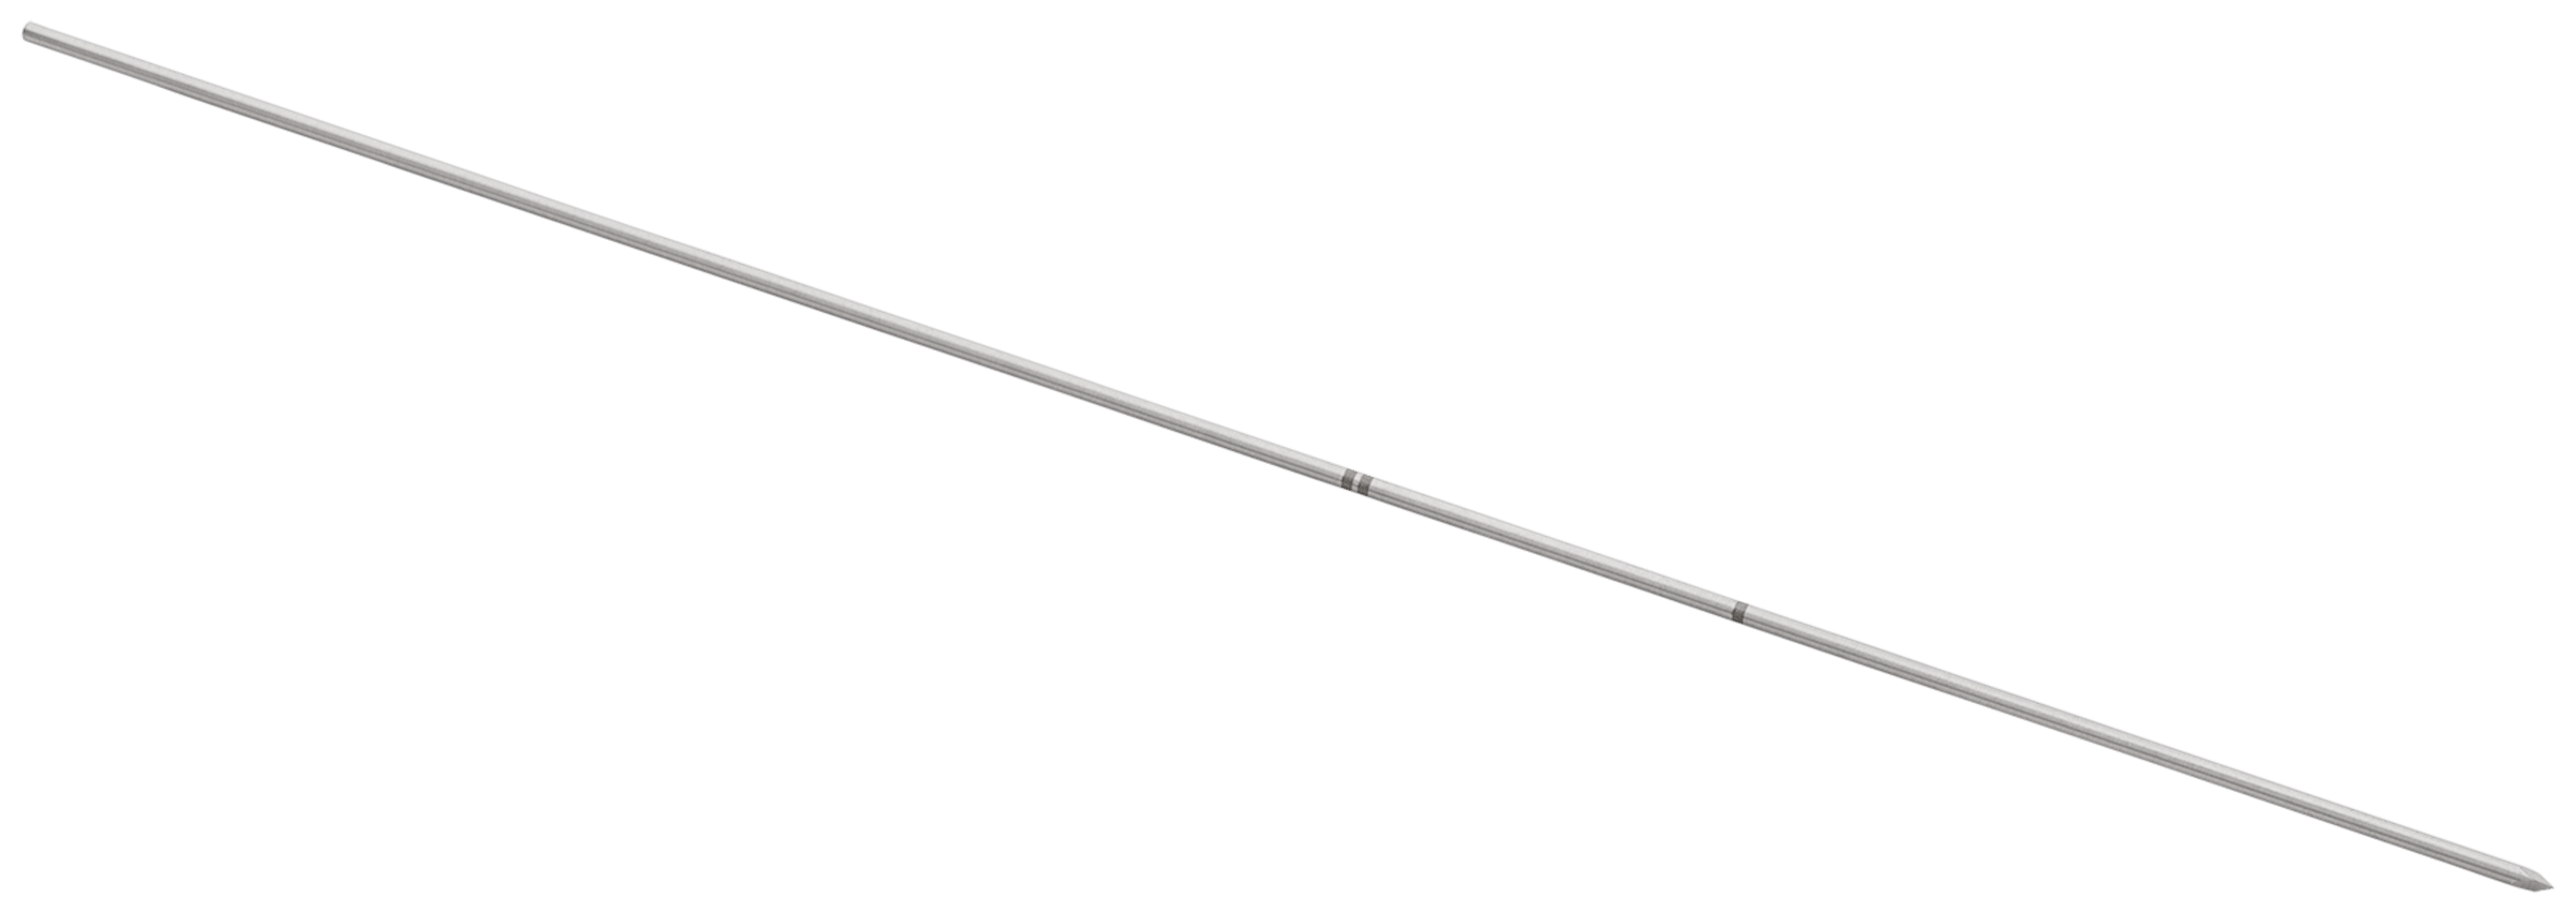 Calibrated measurement wire 1.1mm